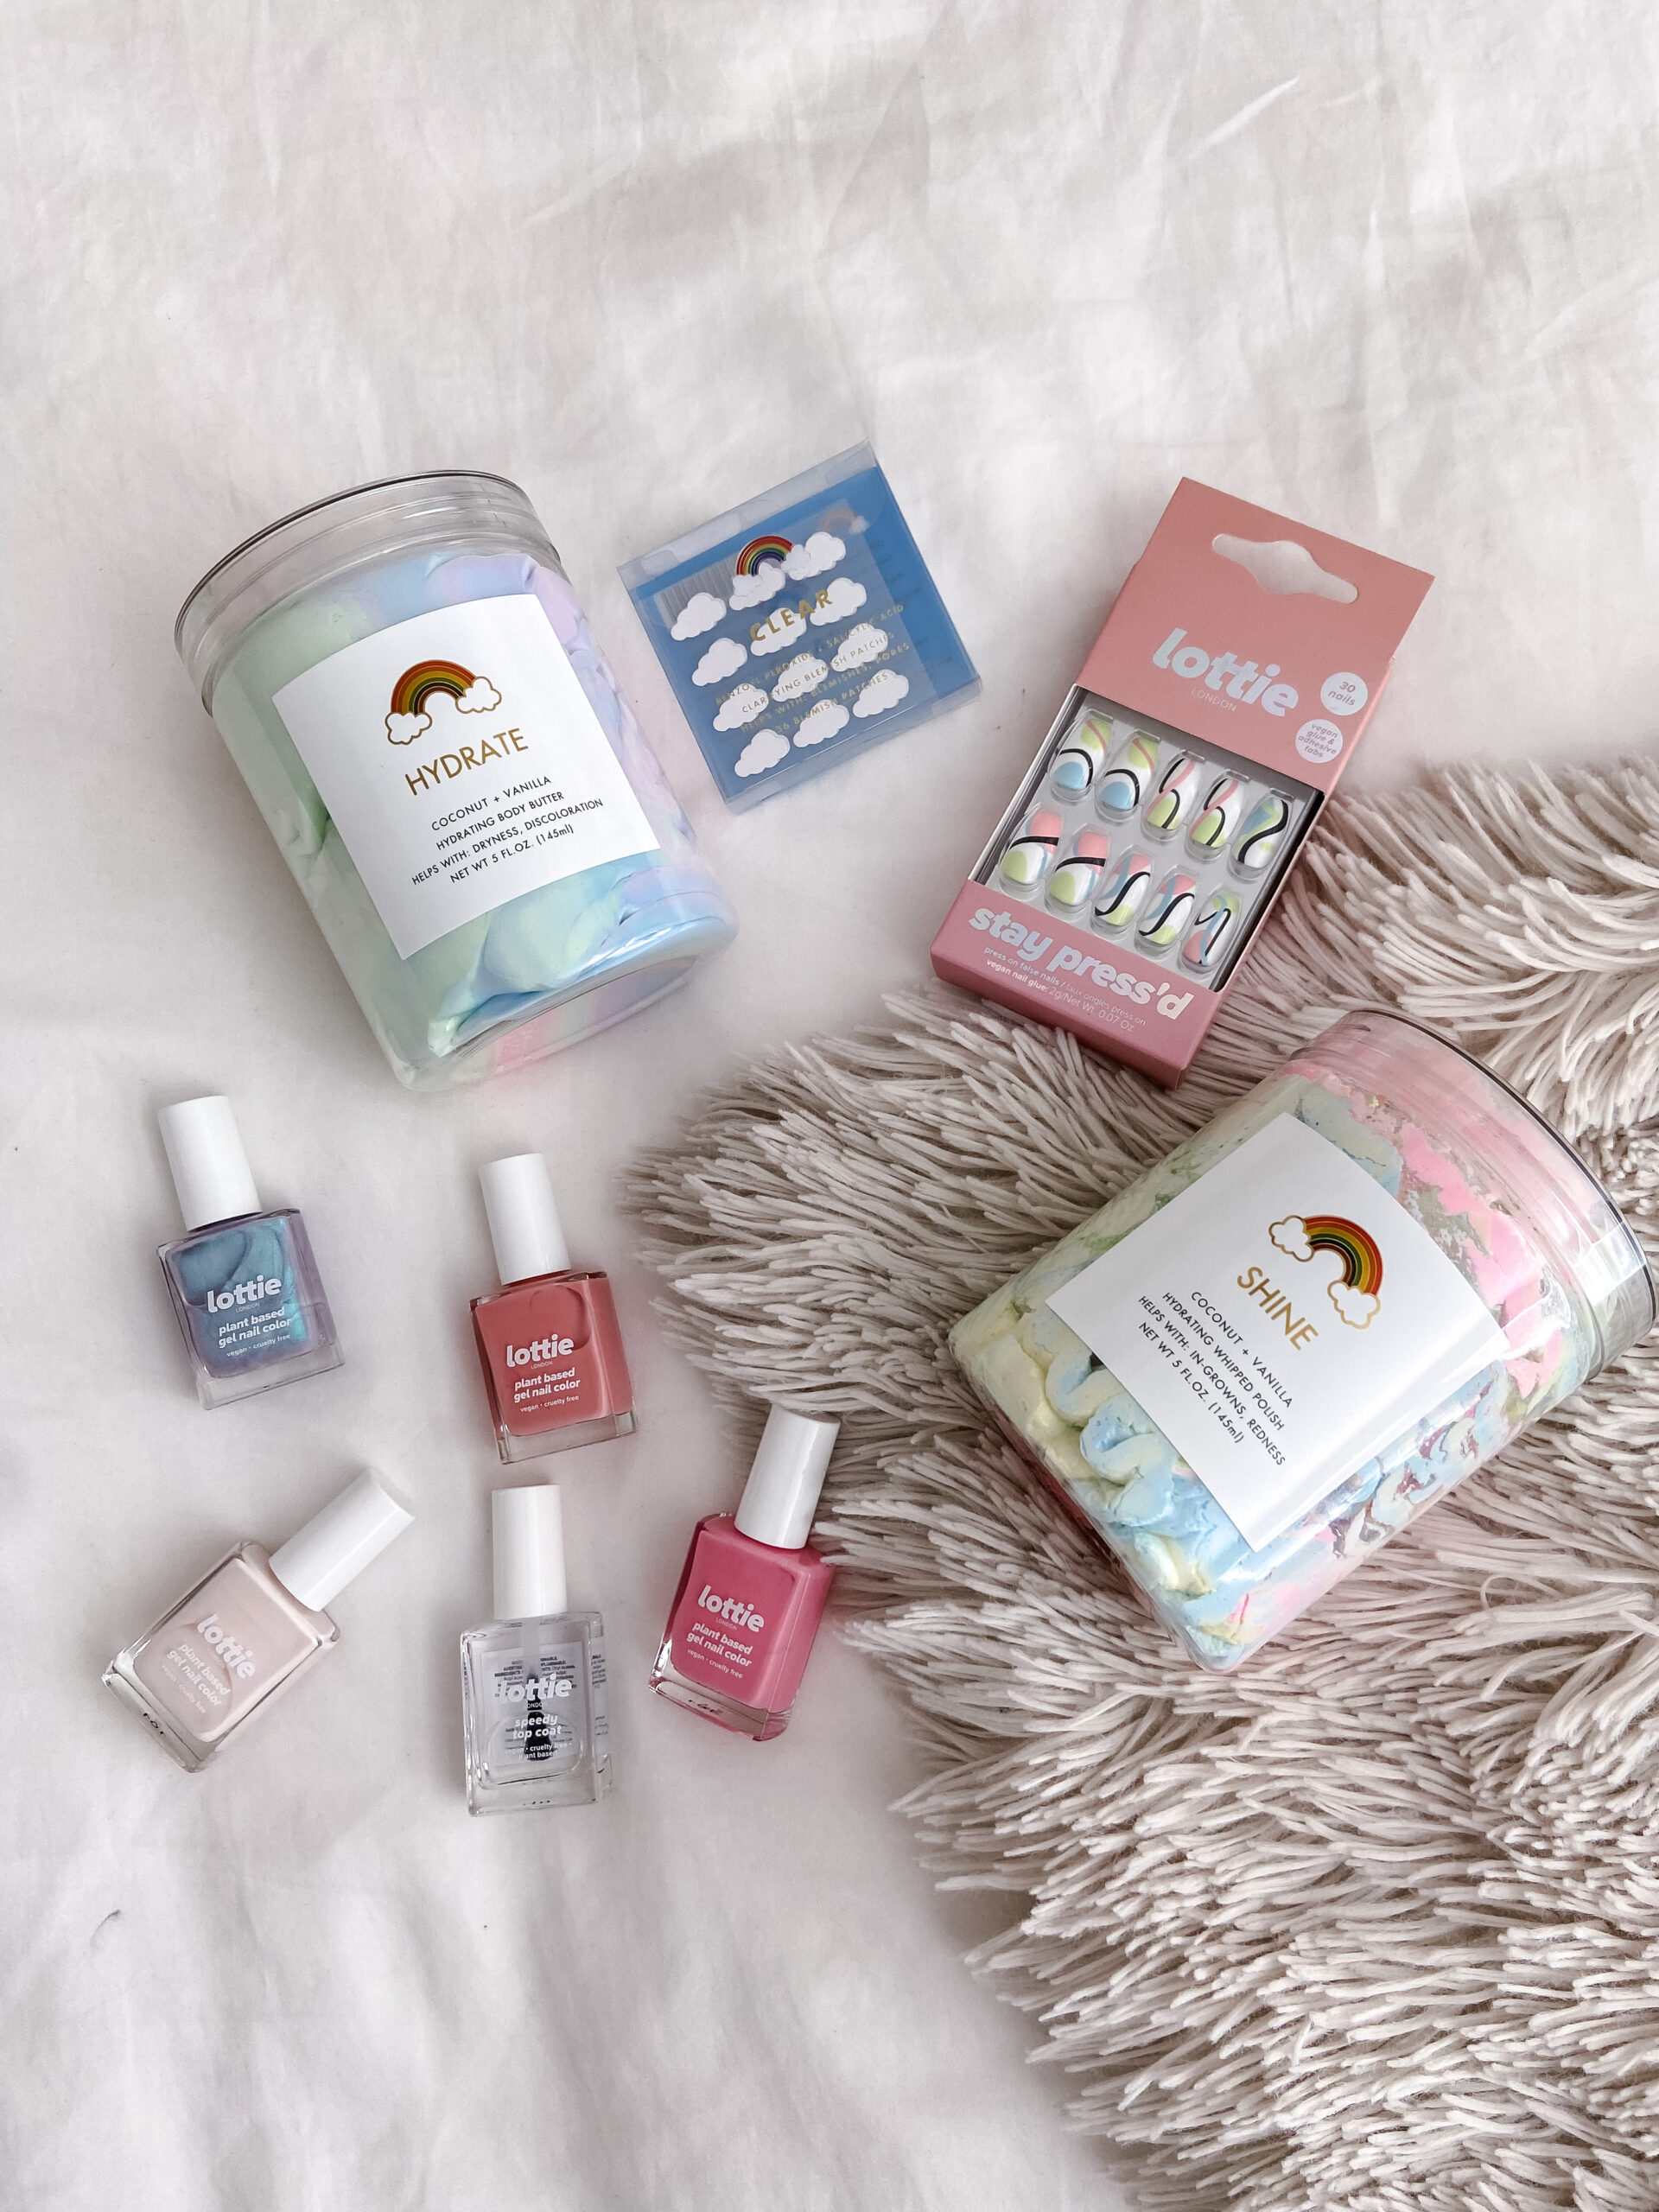 NEW WALMART BEAUTY FINDS-Jaclyn De Leon. Colorful brands discovered at Walmart. Lottie London has fun nail polish and press on nails. Rainbow beauty has a variety of face and body products that are colorful and clean. Perfect for summer.